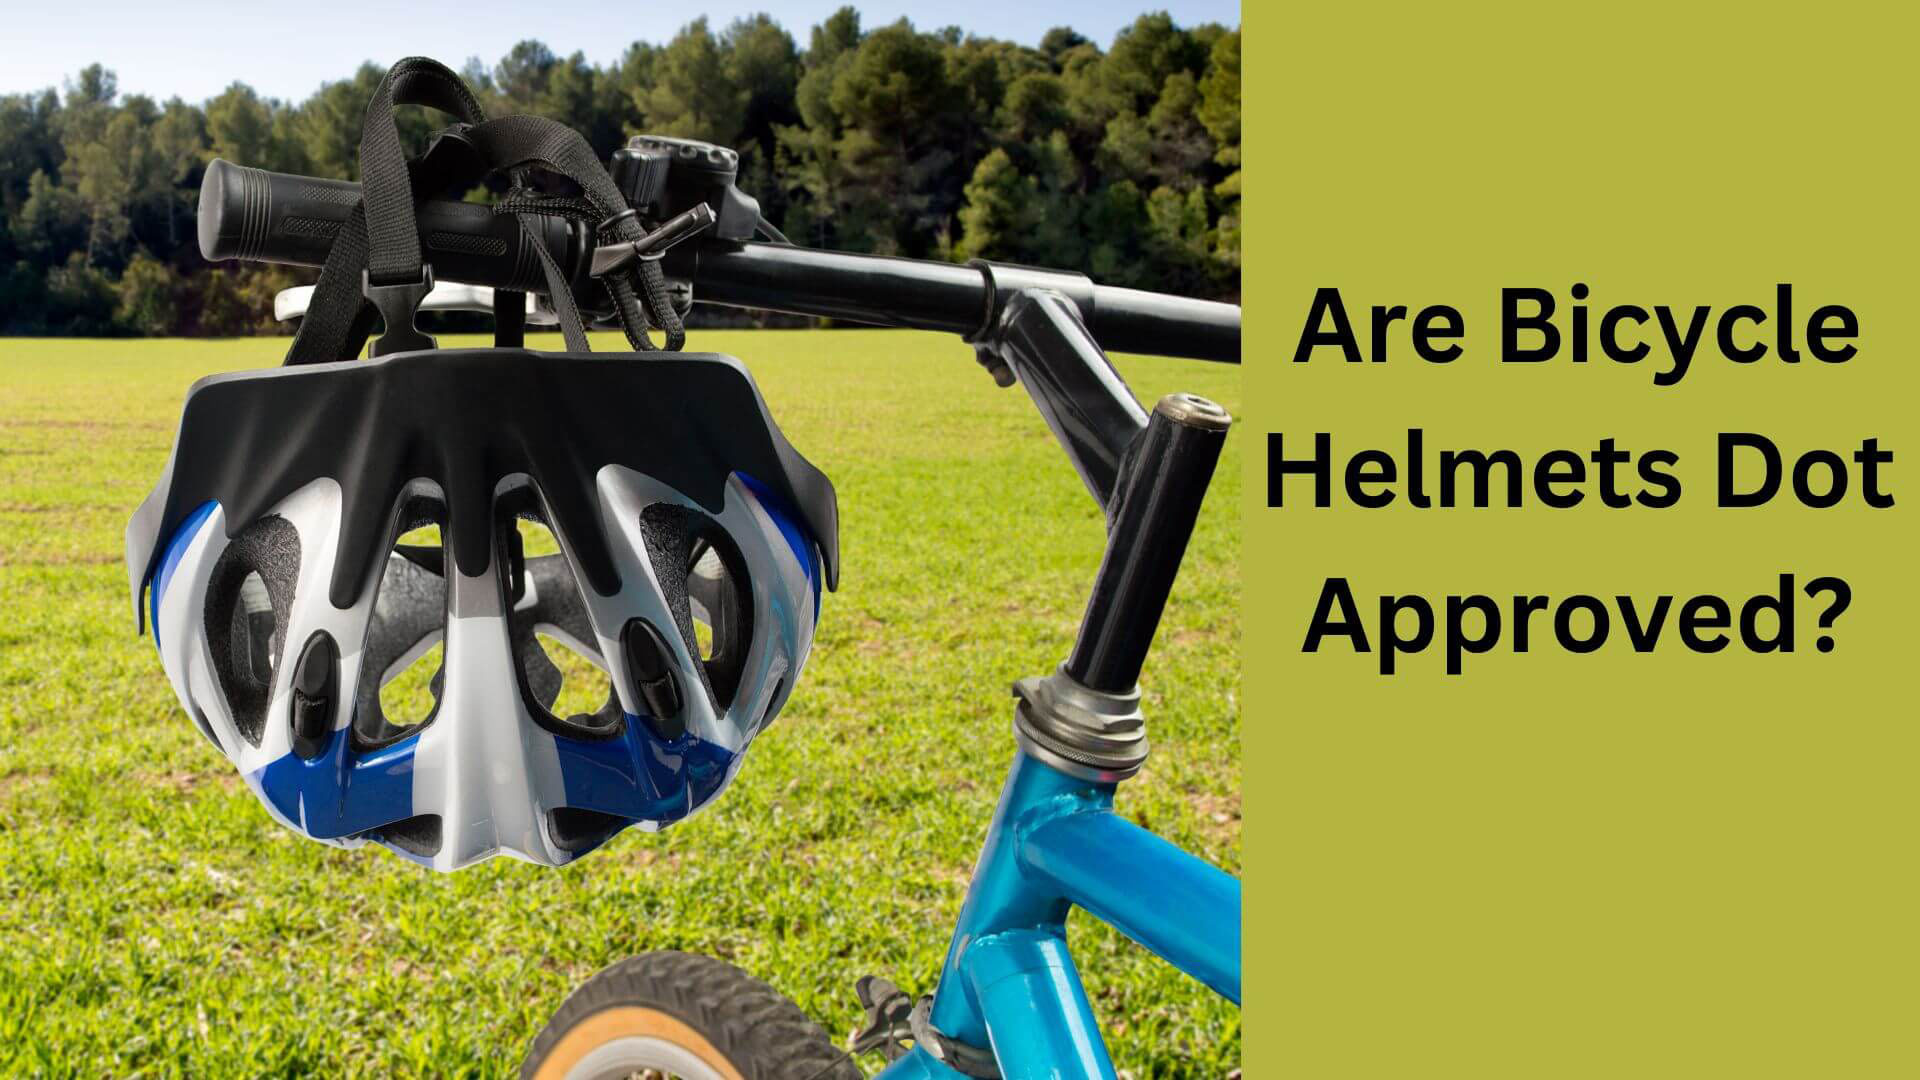 Are Bicycle Helmets Dot Approved?